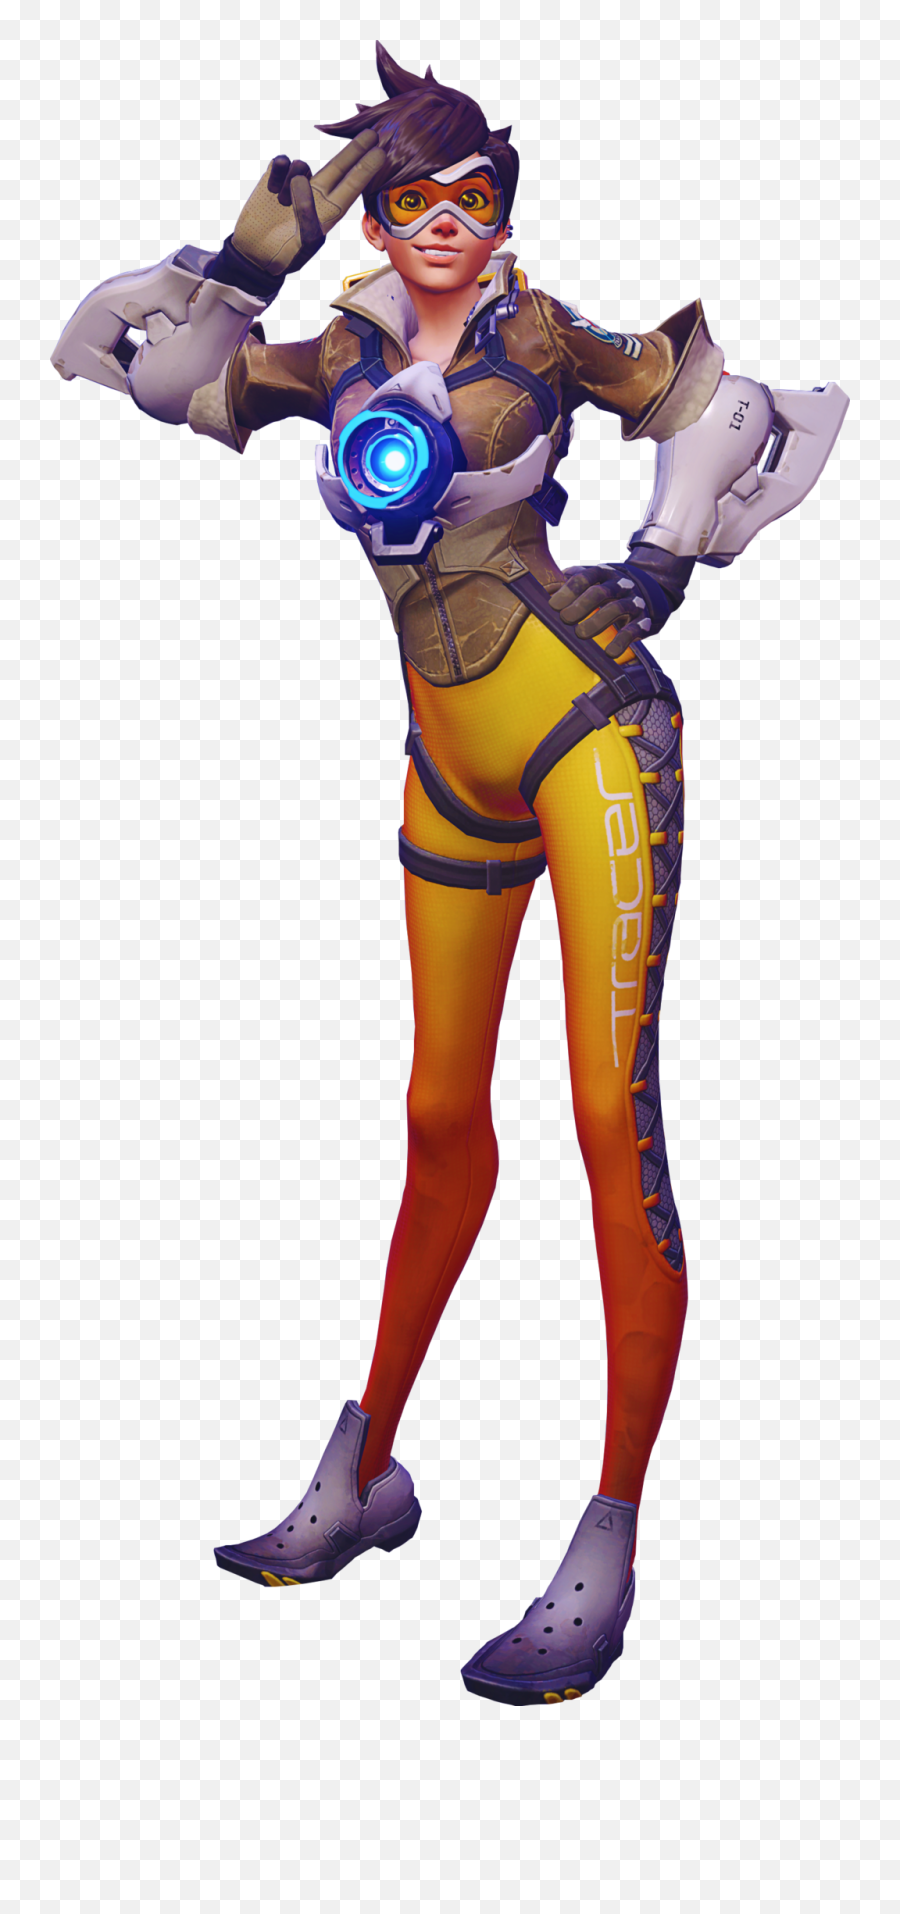 Tracer - Tracer Render Png,Overwatch Tracer Png